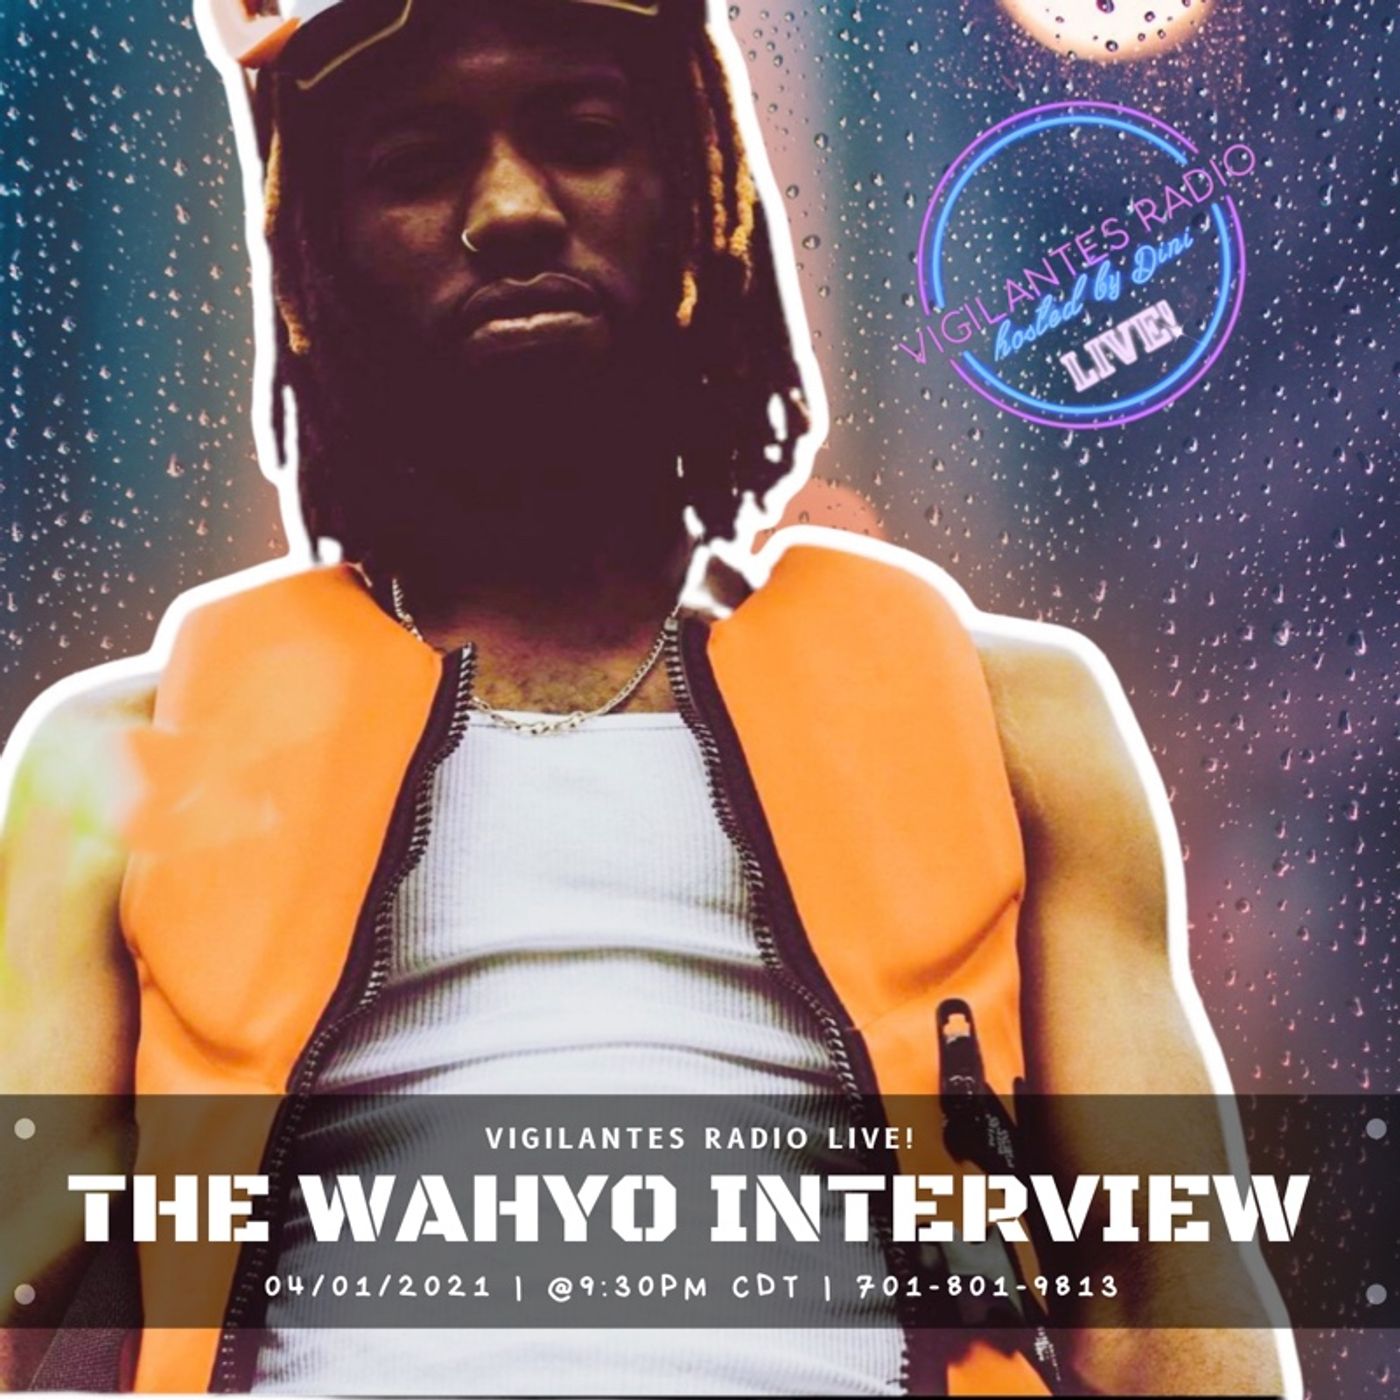 The Wahyo Interview. Image